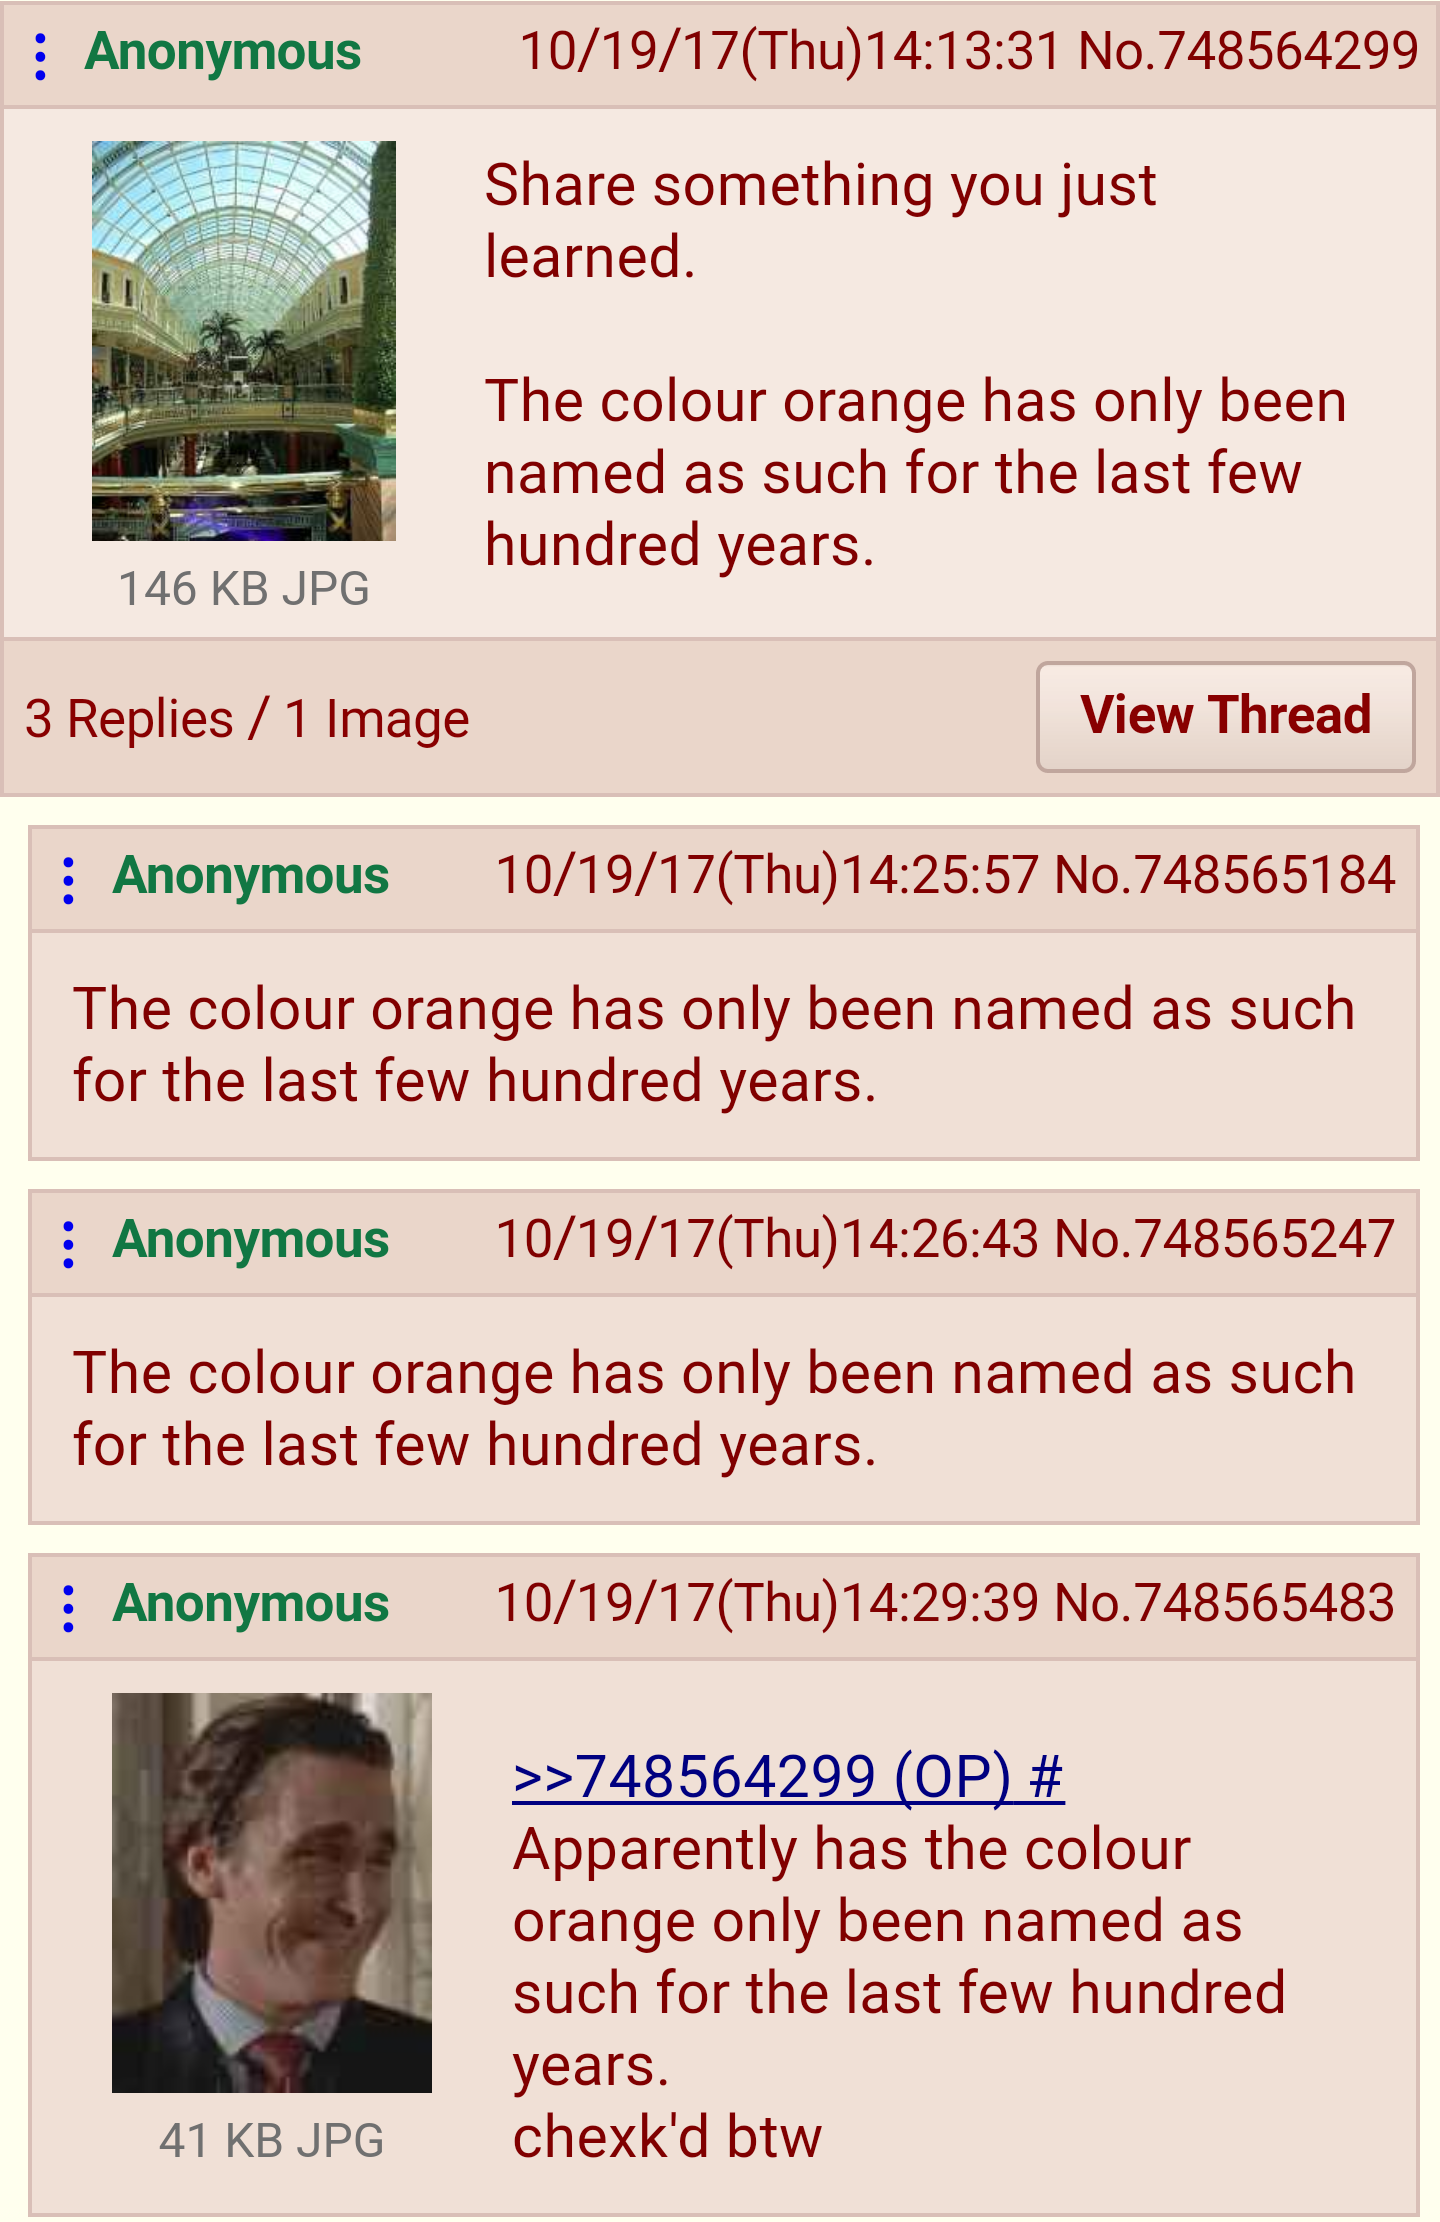 Anon learns something new